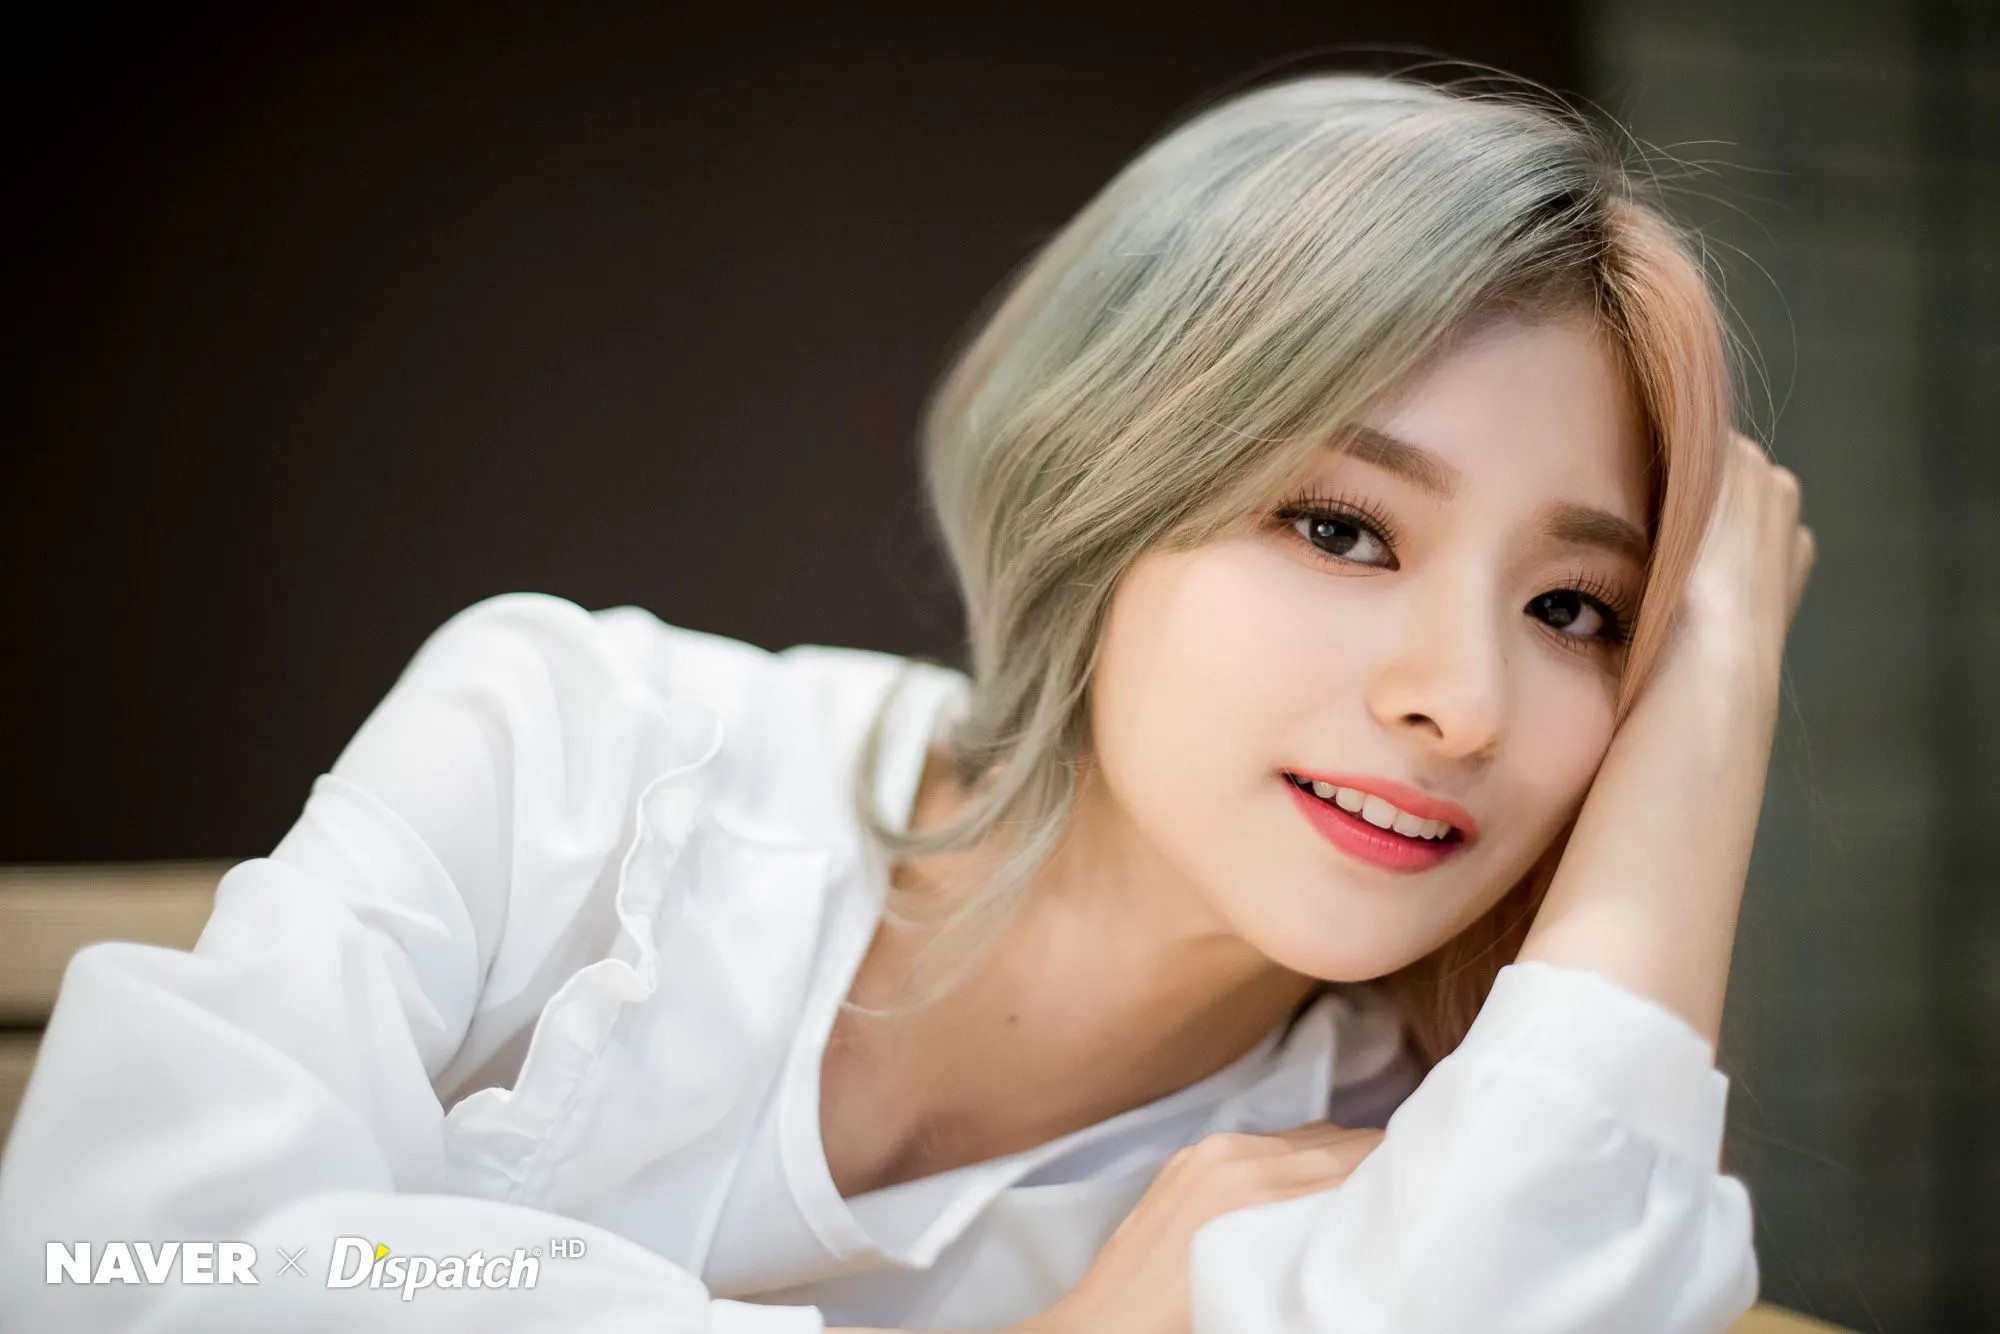 fromis_9 Lee Nagyung - Pepero Day Event by Naver x Dispatch | Kpopping